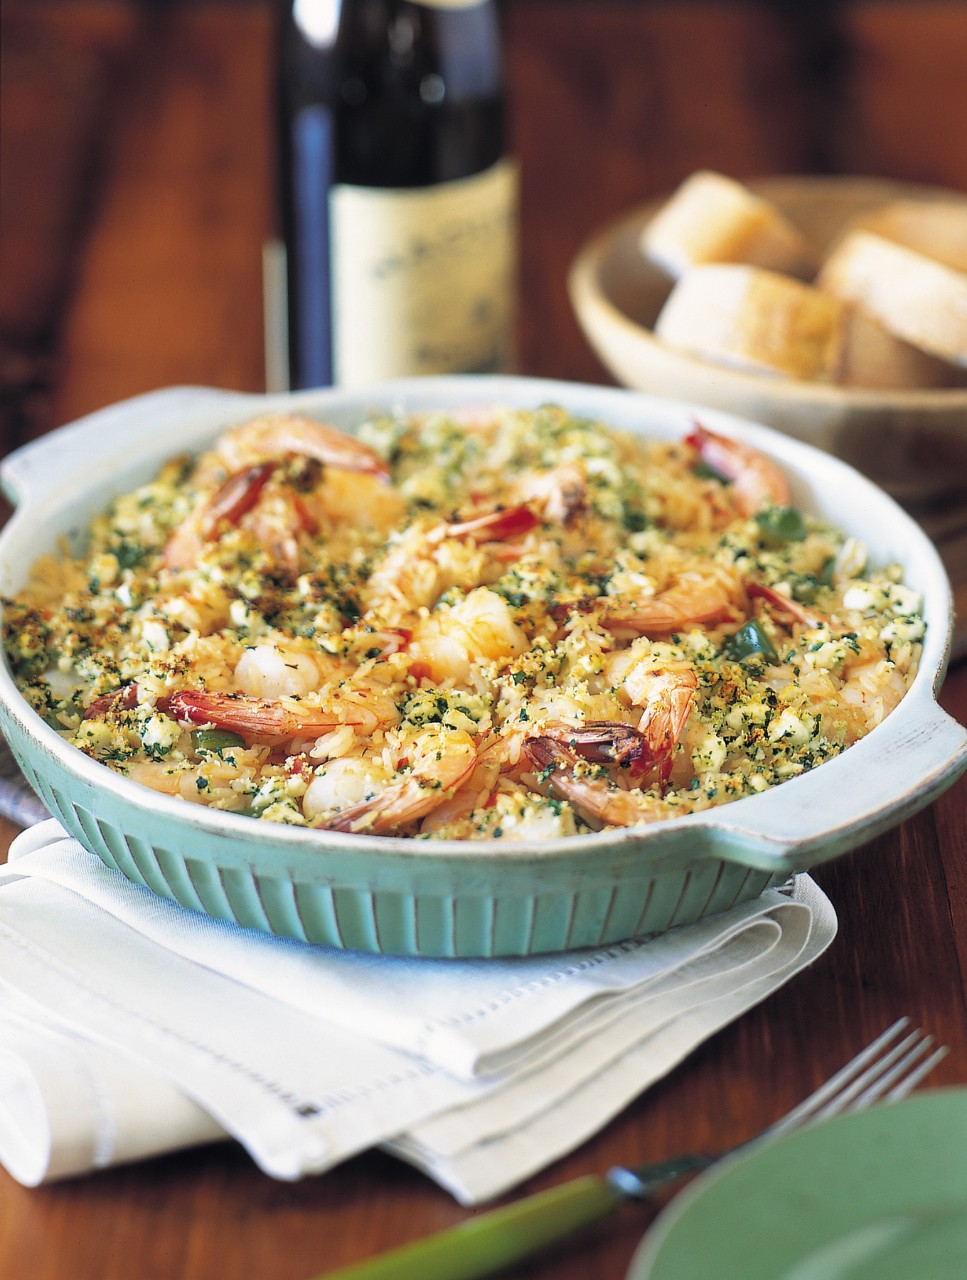 Greek Rice and Shrimp Bake with Feta Crumb Topping